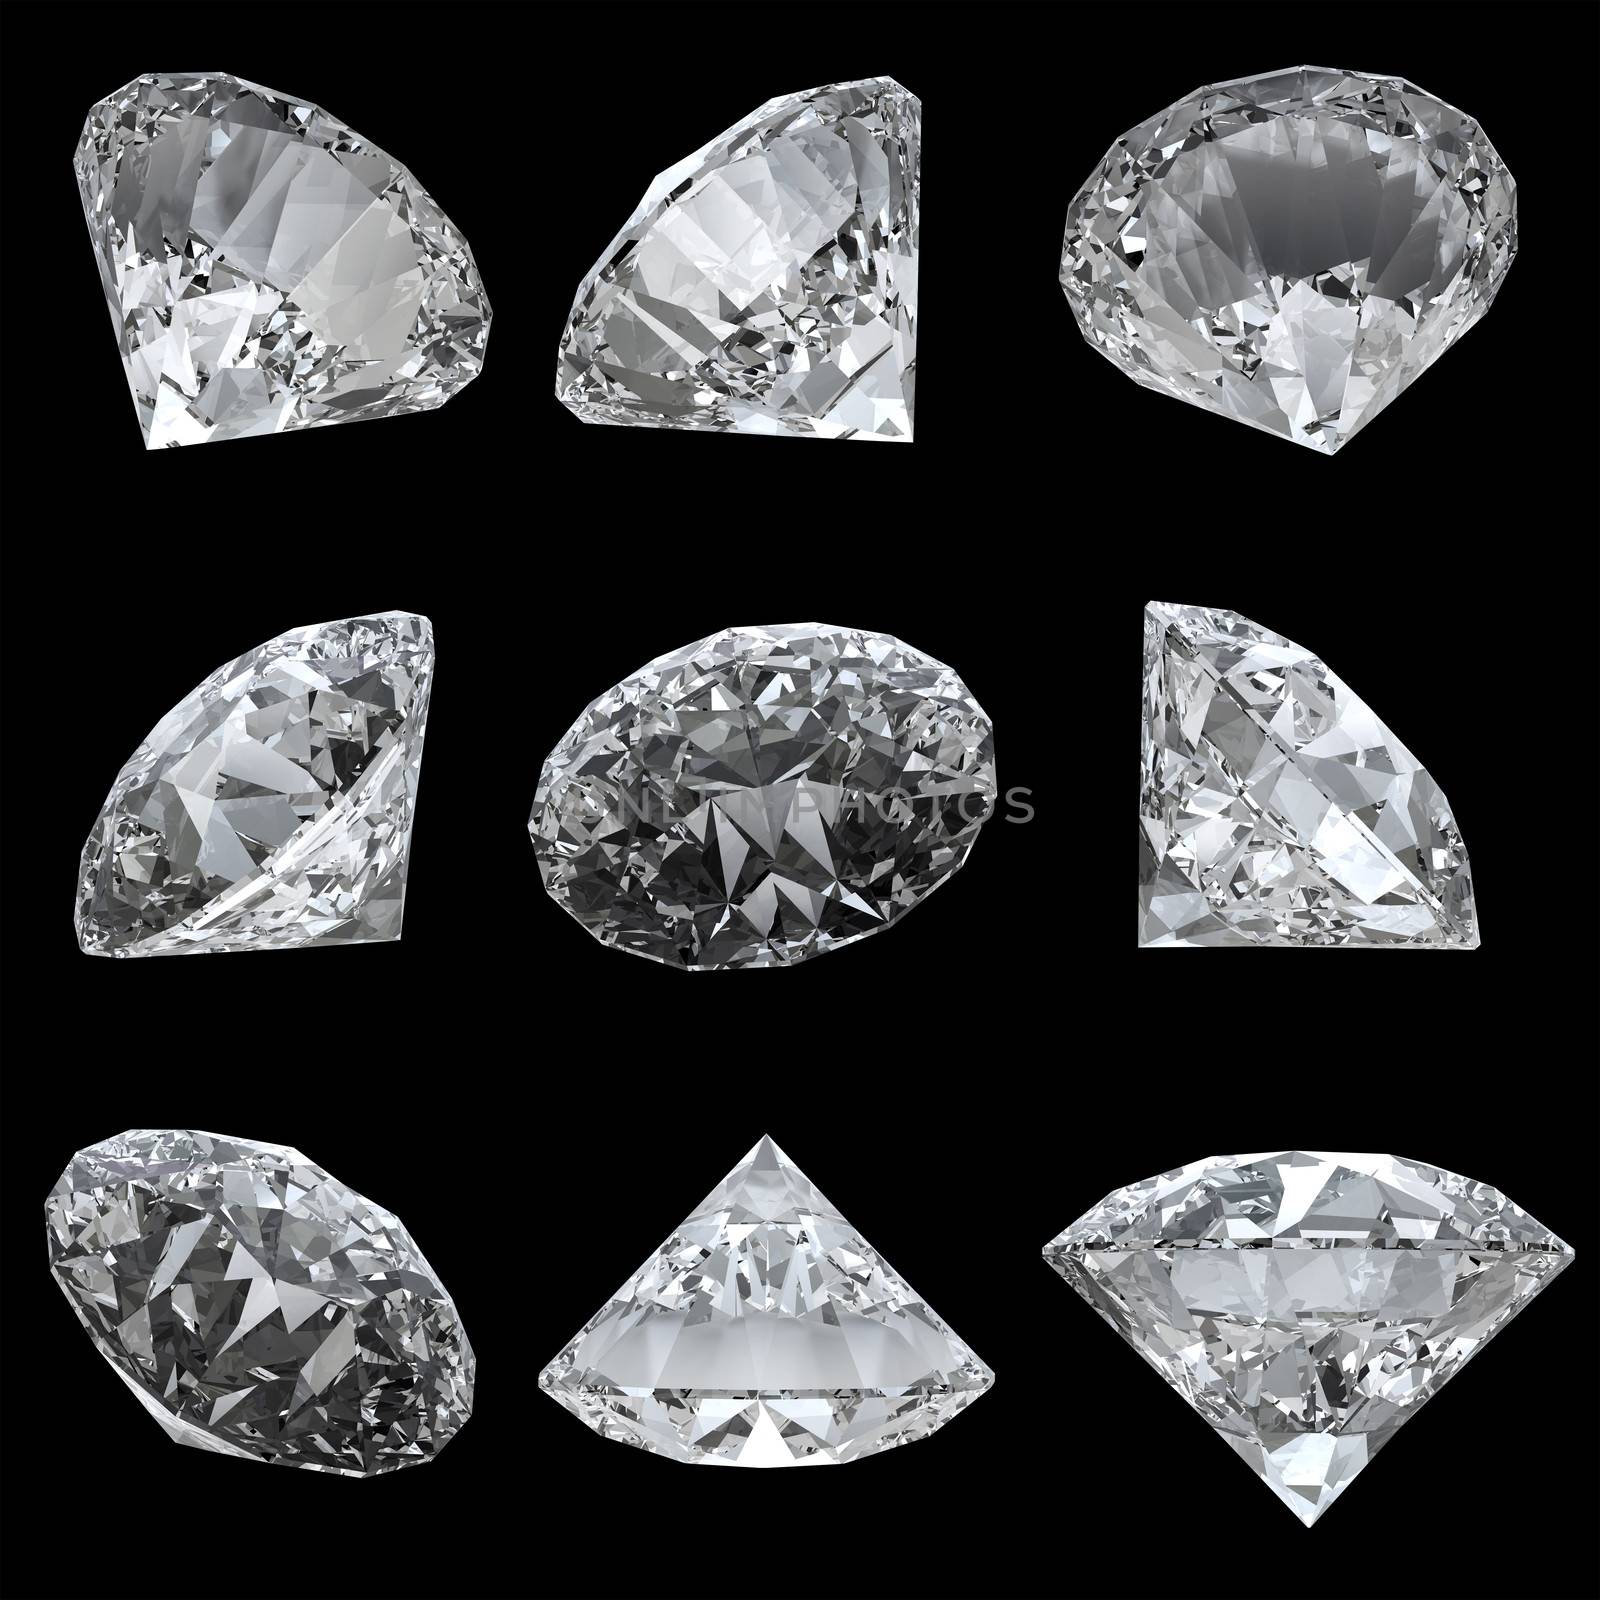 Set of 9 diamonds with clipping path by 123dartist